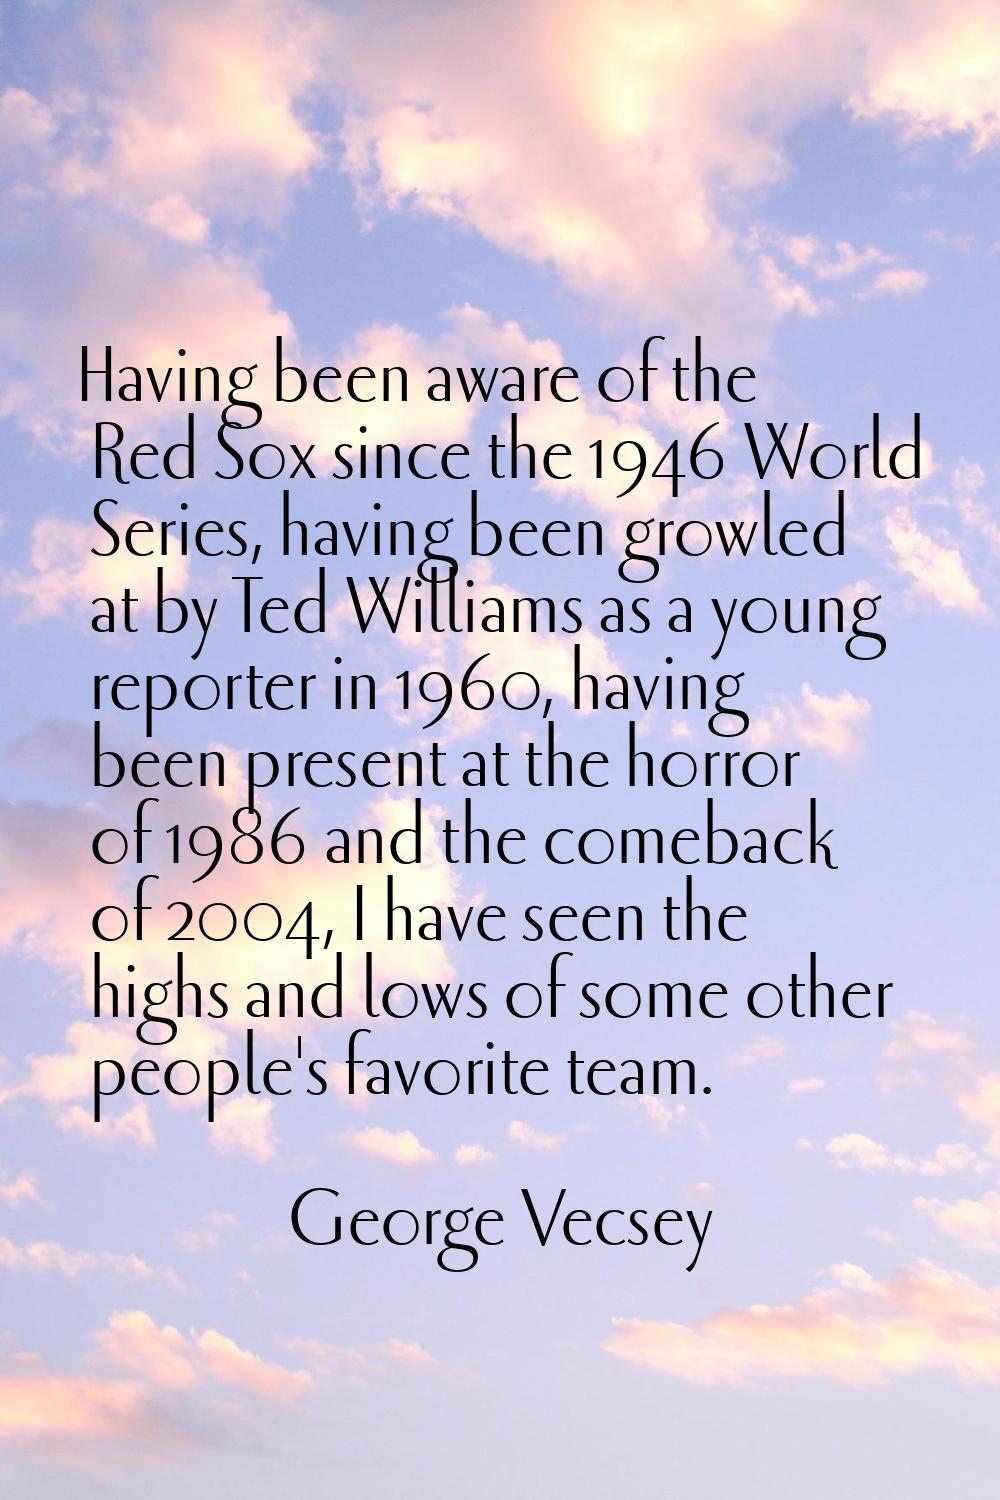 Having been aware of the Red Sox since the 1946 World Series, having been growled at by Ted William